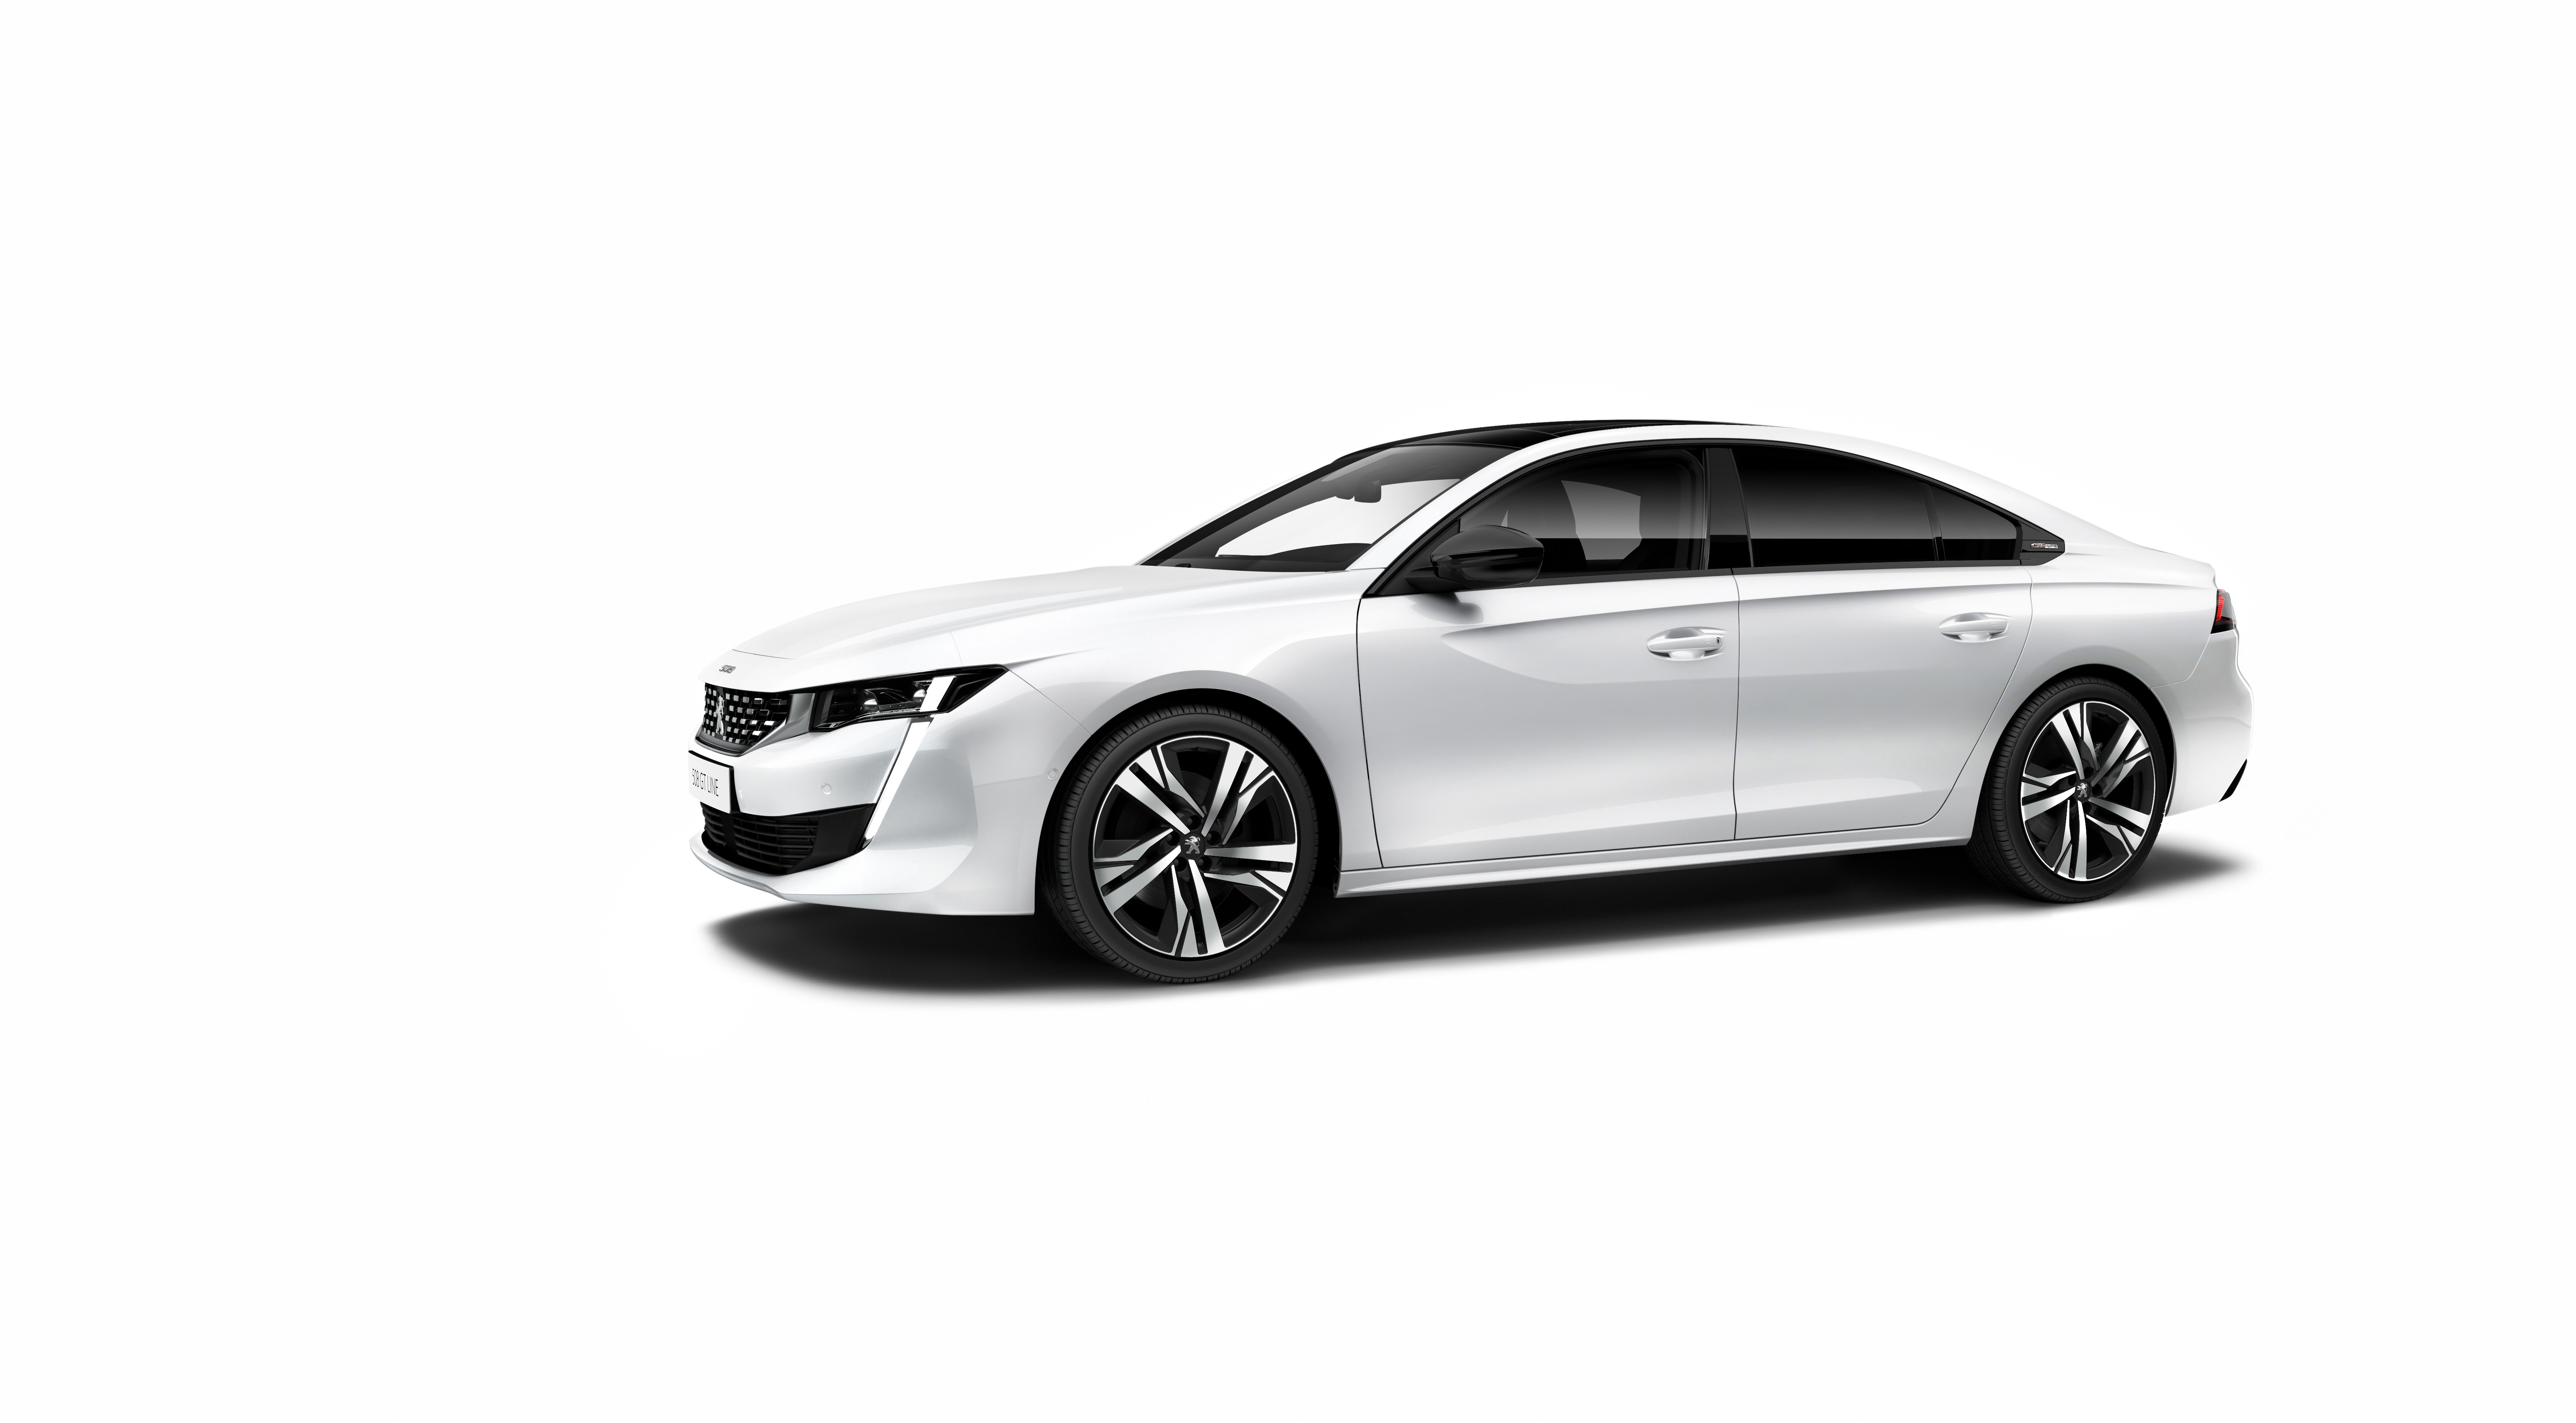 New Peugeot 508 officially revealed now smaller and with